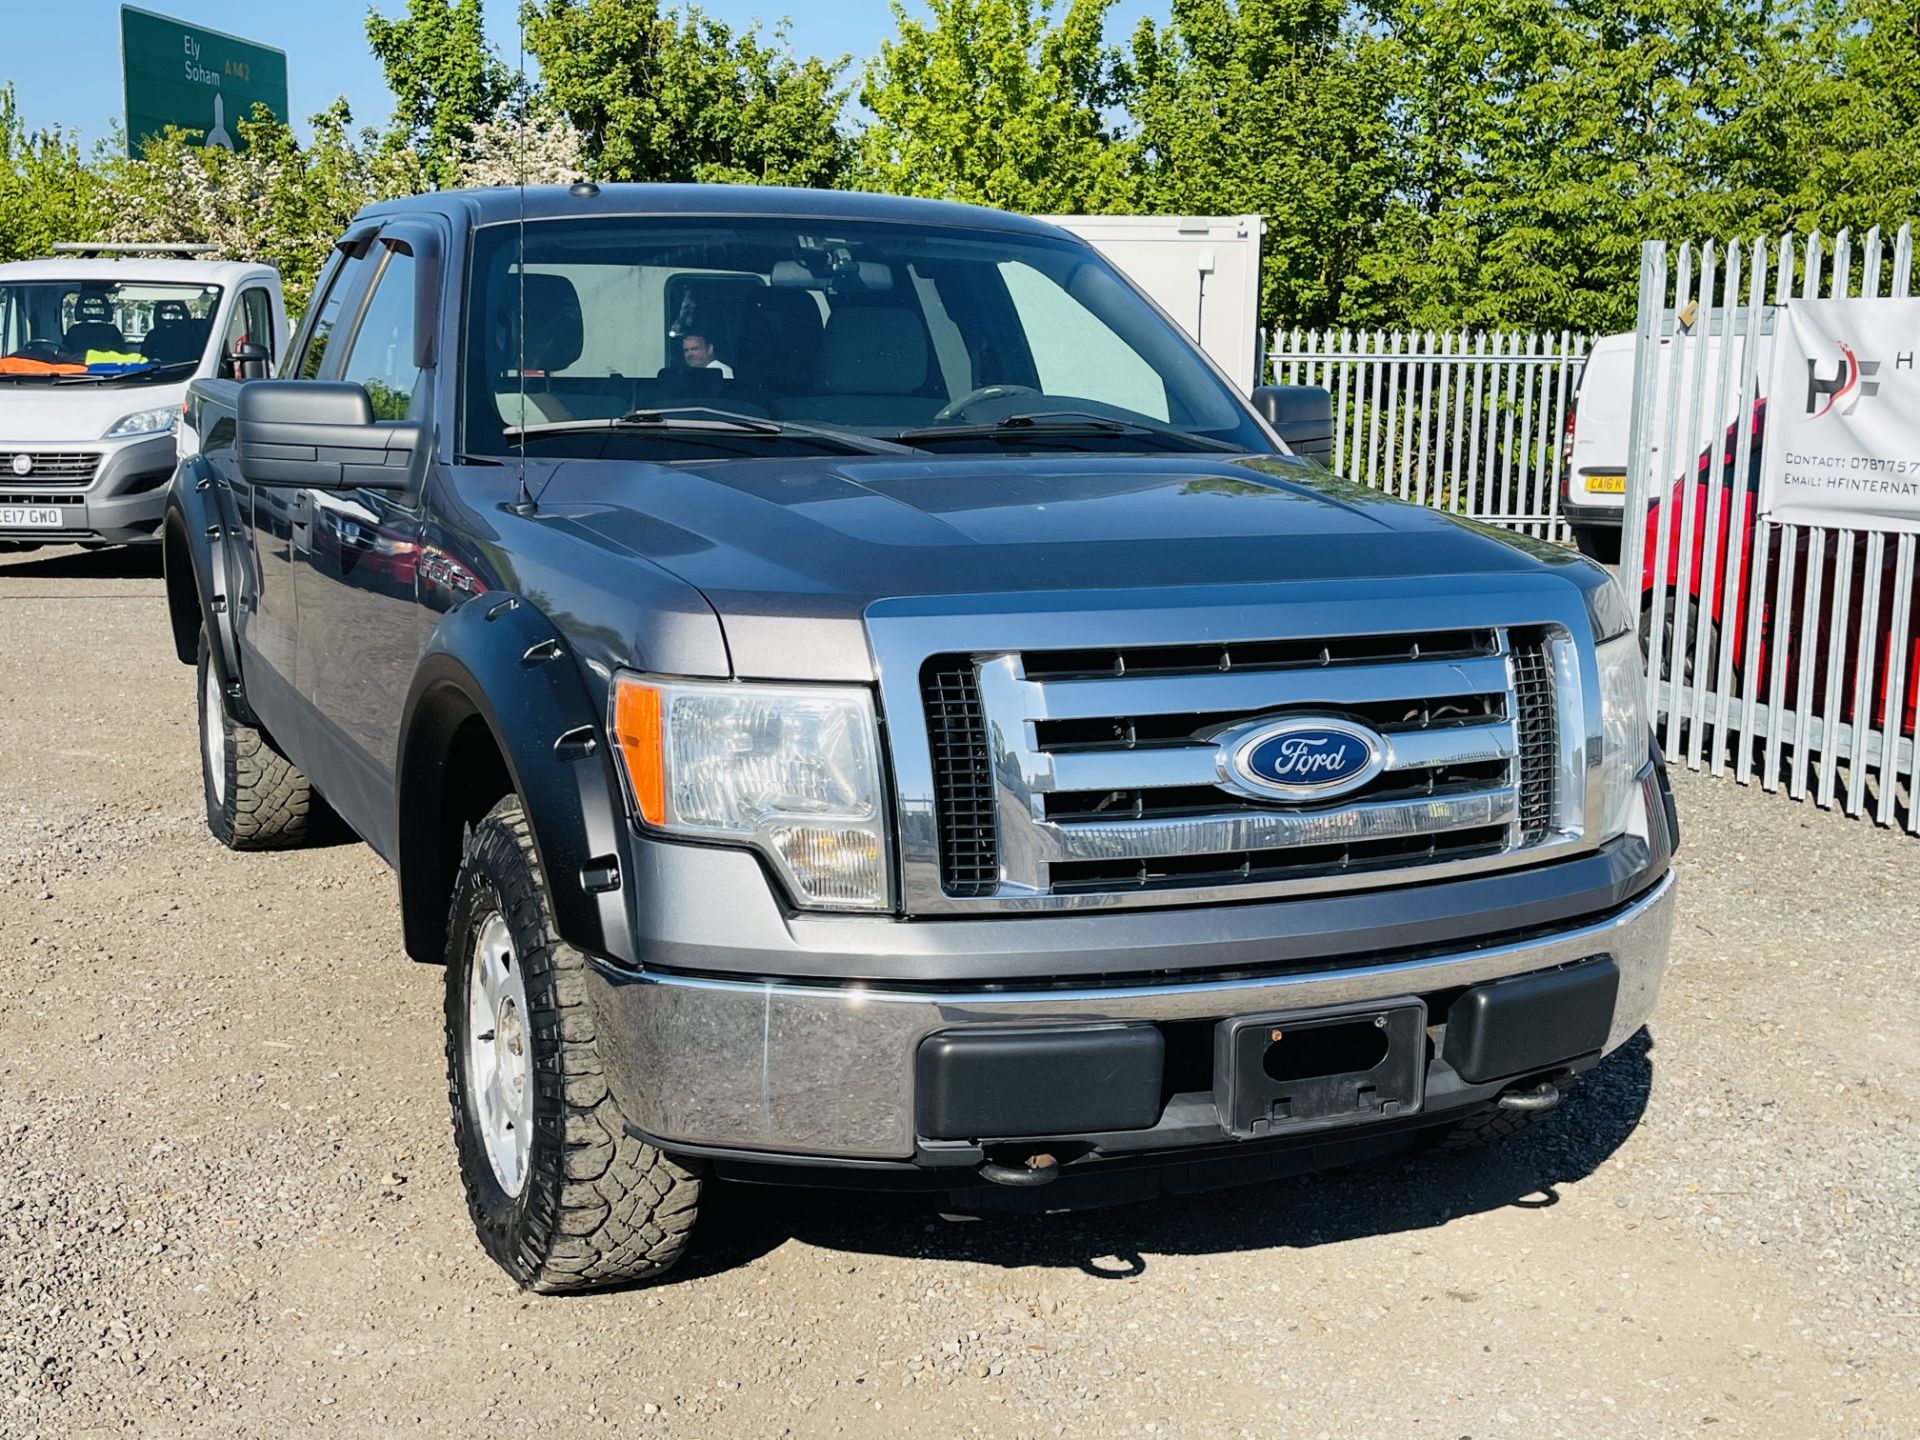 ** ON SALE **Ford F-150 4.6L V8 XLT Edition Super-Cab 4x4 '2010 Year' Air Con - 6 seats- Pick Up - Image 2 of 19